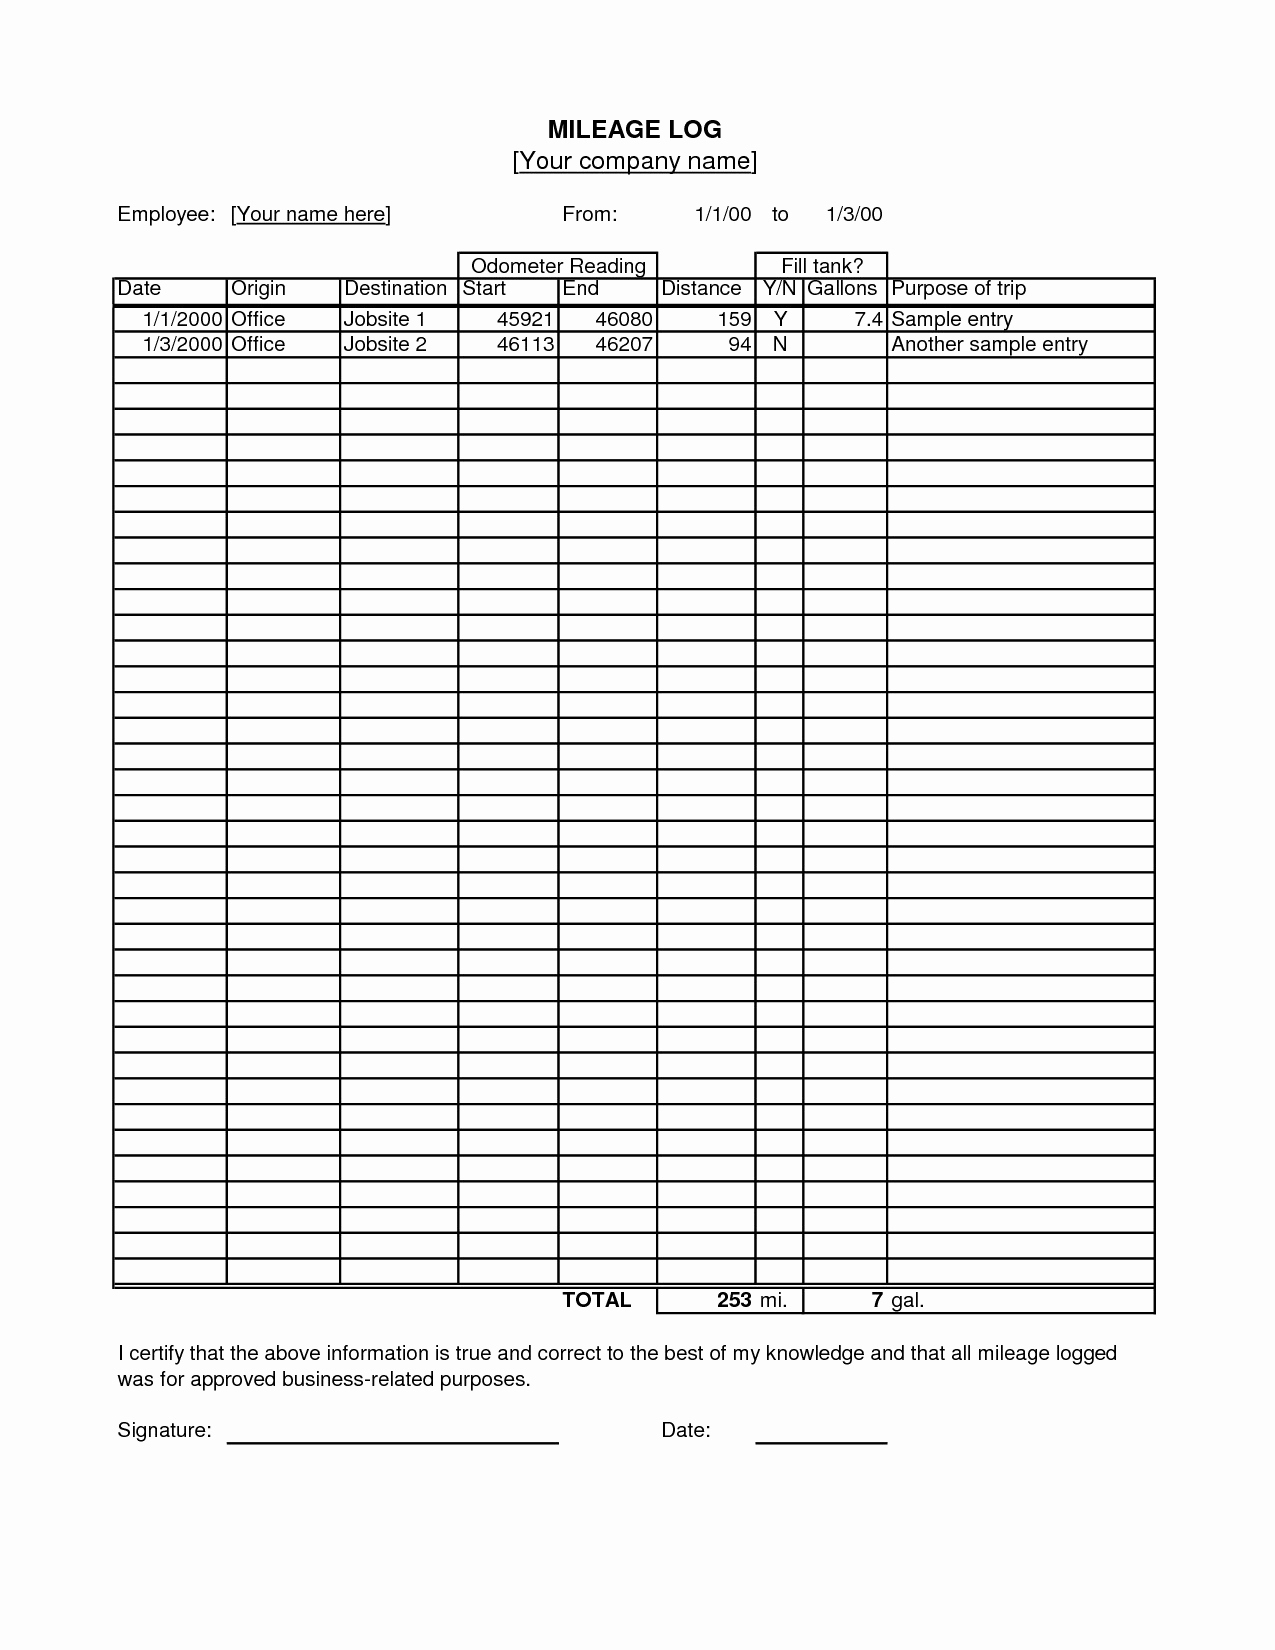 mileage-log-spreadsheet-intended-for-22-printable-mileage-log-examples